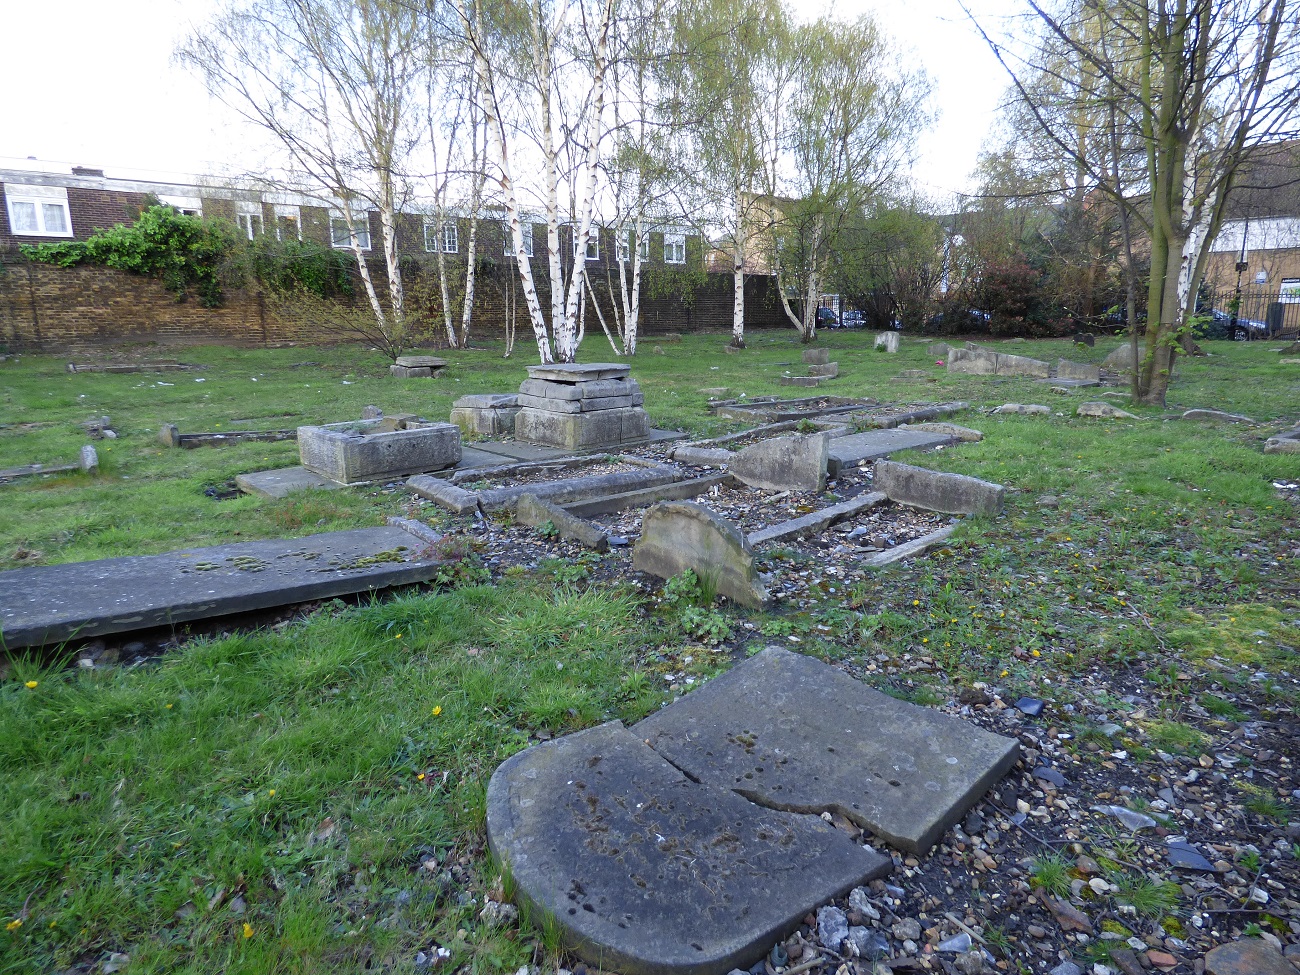 20160423_Tower-Hamlets_Bancroft-Road-Jewish-Cemetery_Neglected